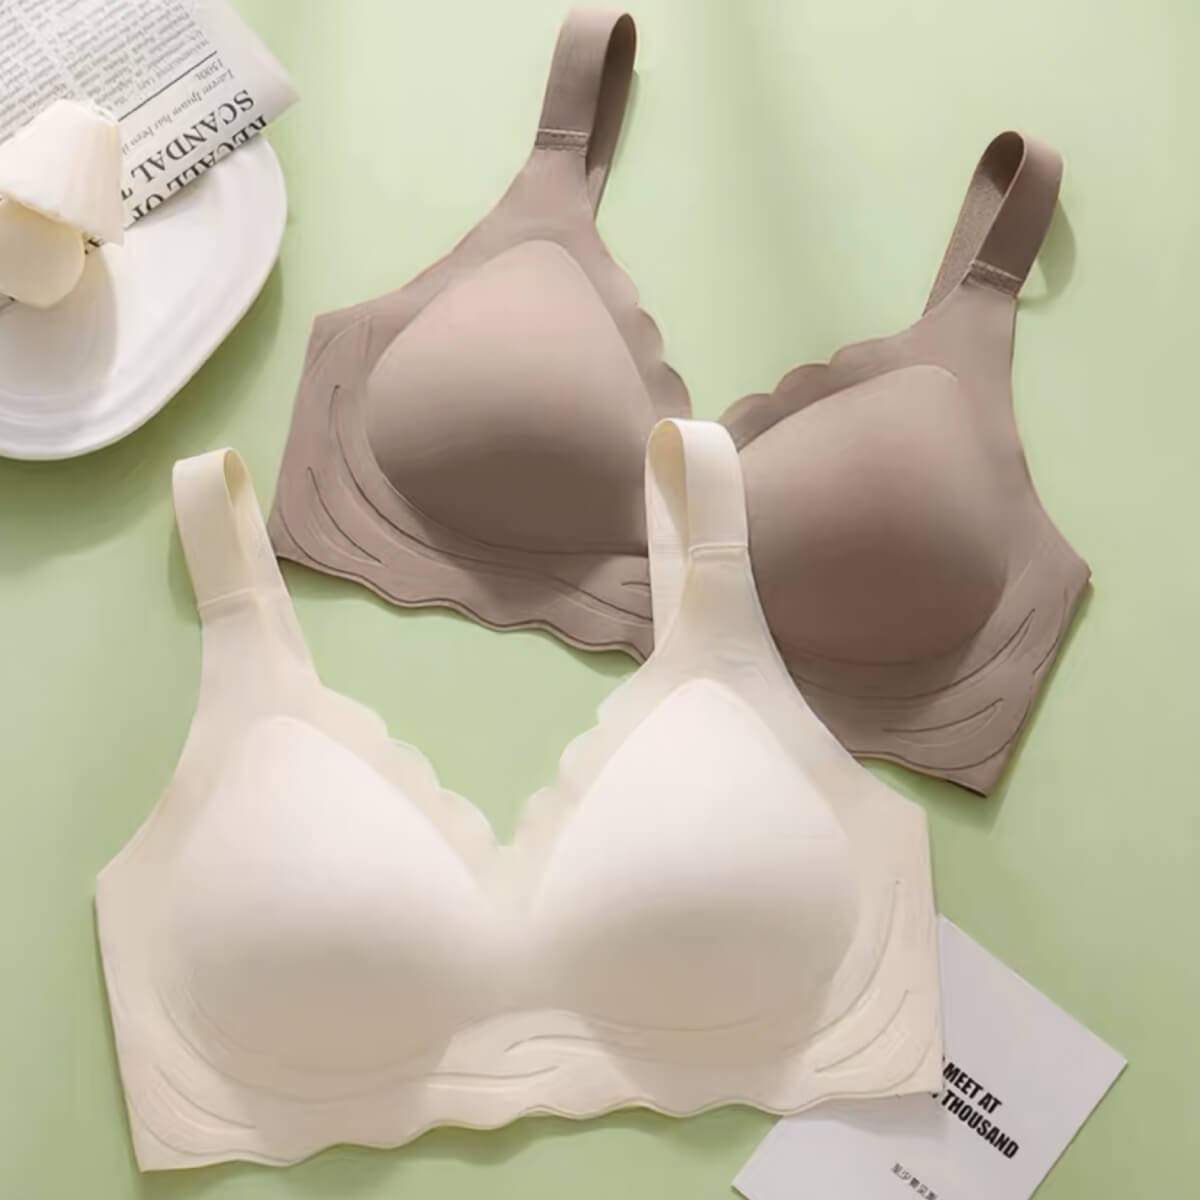 Anti-Sagging, Comfortable and Seamless, This Revolutionary Bra Is